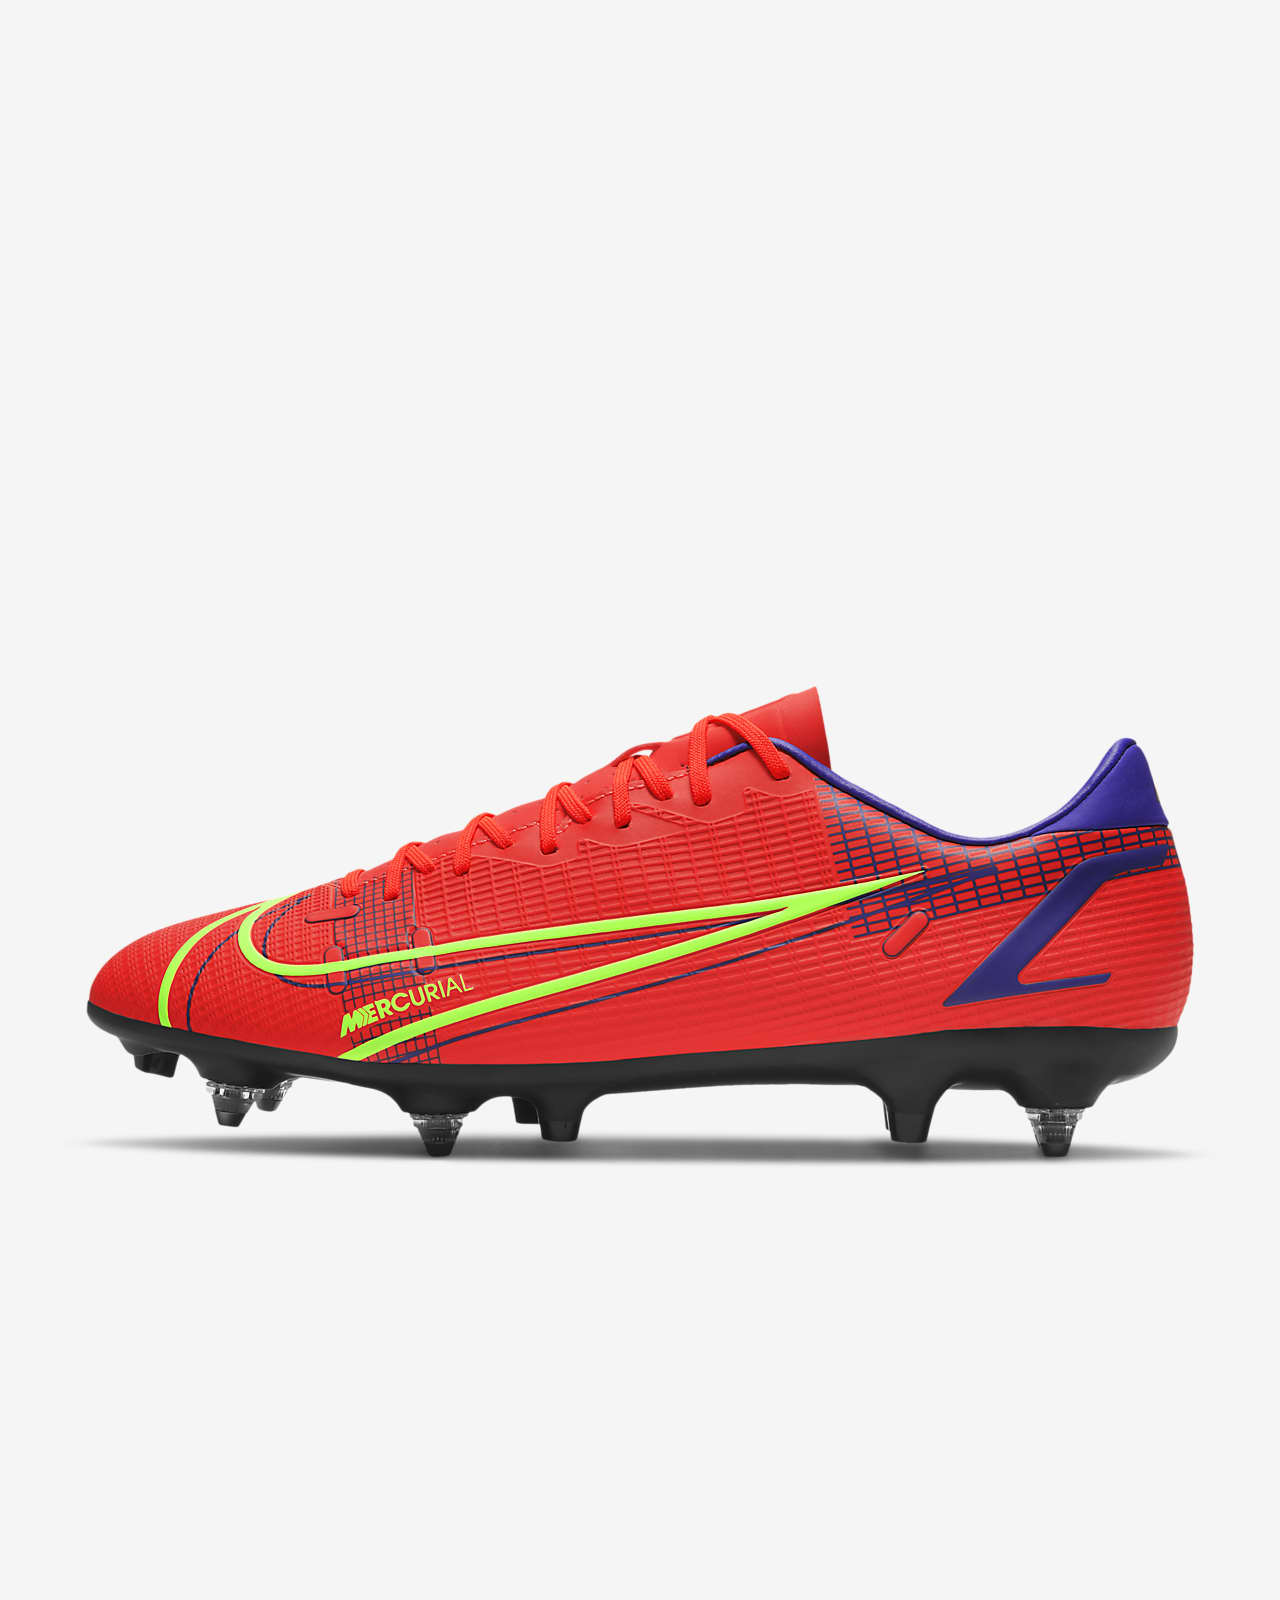 size 14 nike football boots